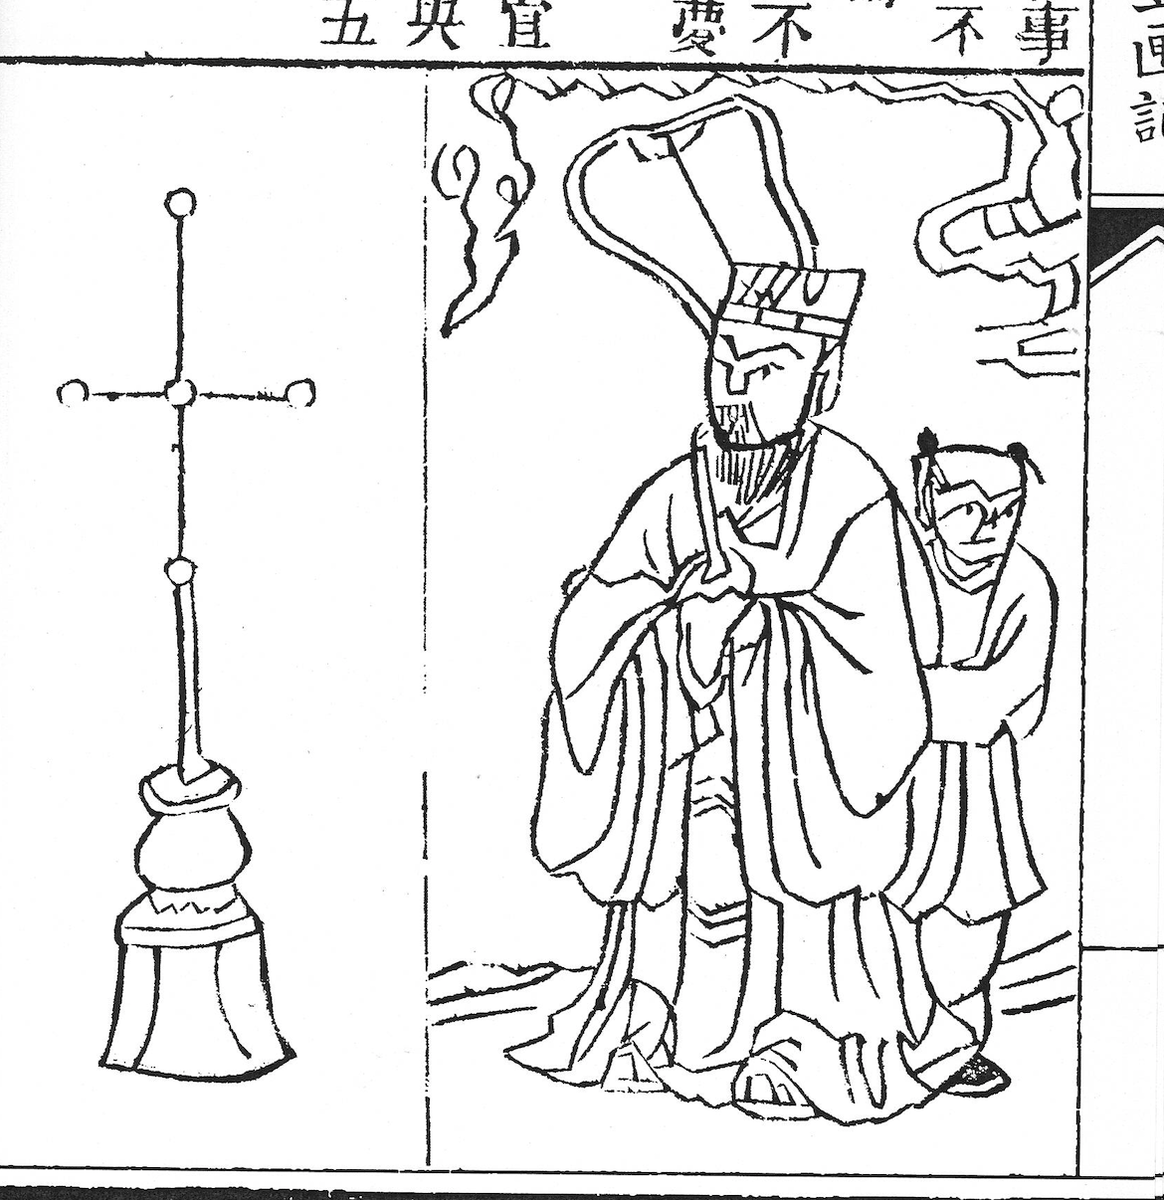 33. Notice again how the Zhulin edn has an errror: The shape beside Saturn should have 5 circles(i.e lamps) but the figure contains 21 lamps instead! the correct fig is shown again fr. the woodblock edn: